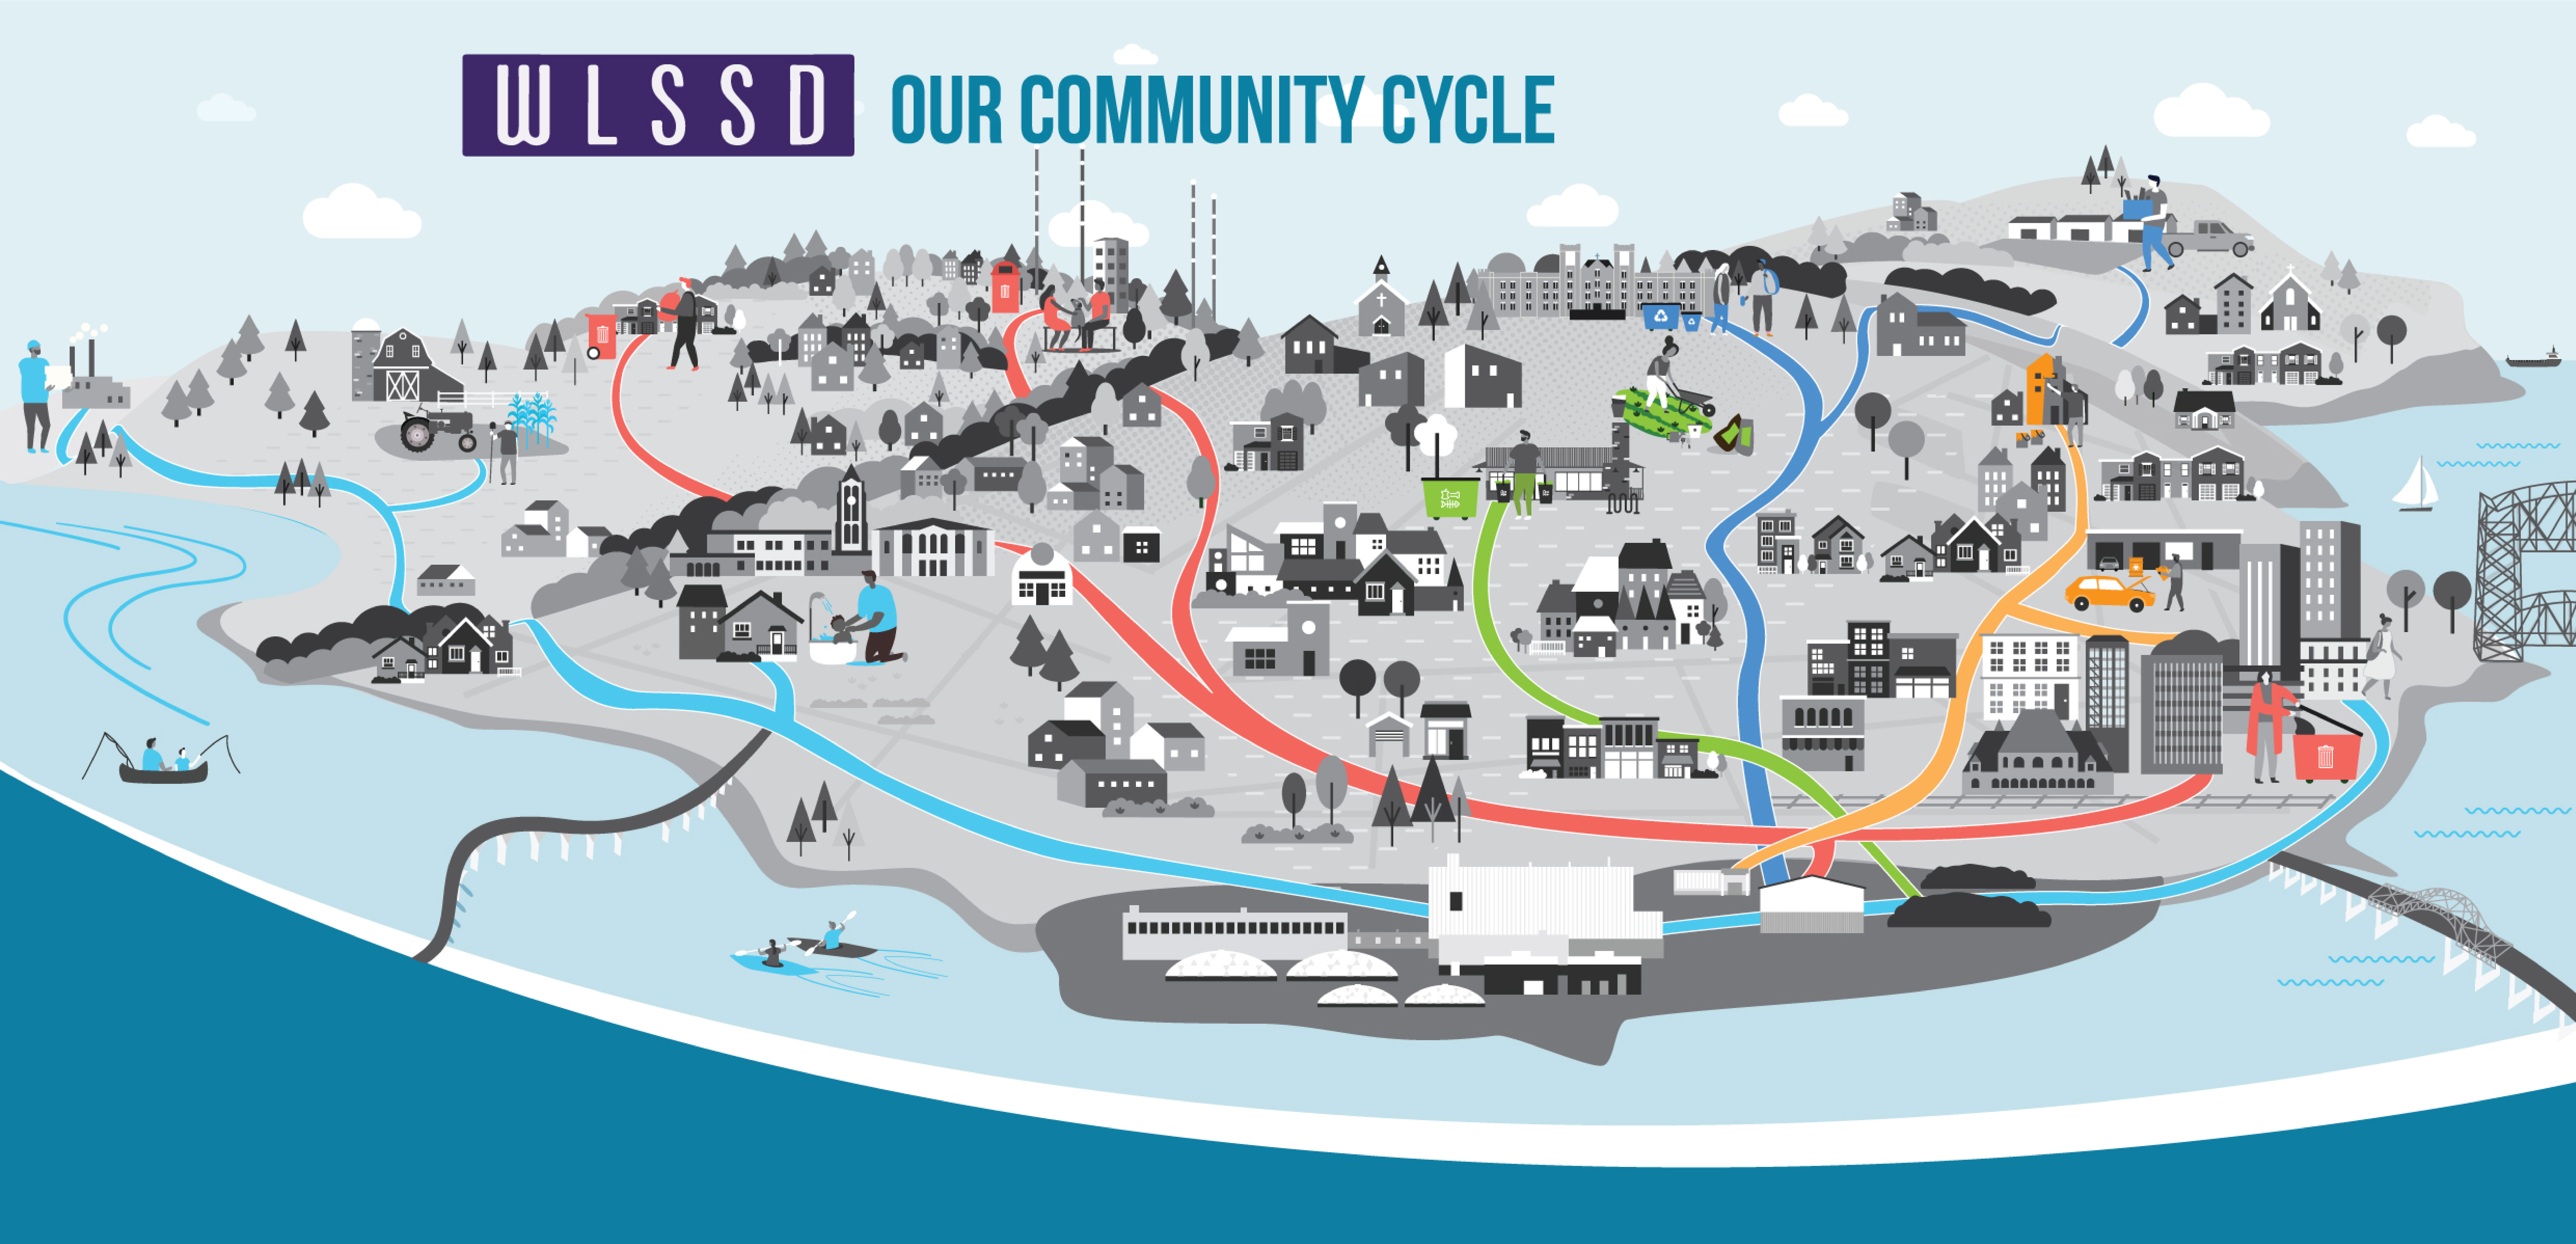 WLSSD 'Our Community Cycle' internal wall mural, design by Šek Design Studio